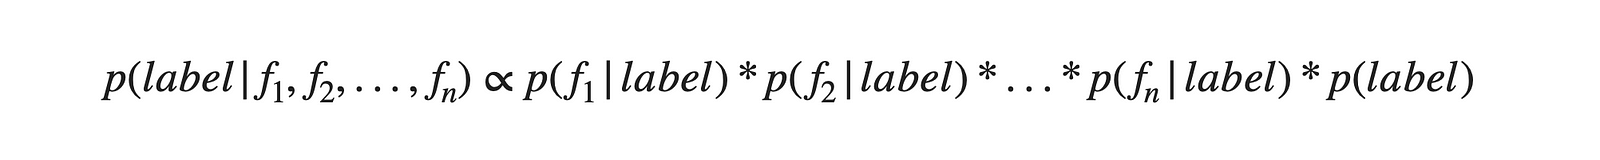  posetrior probability for multiple features 4